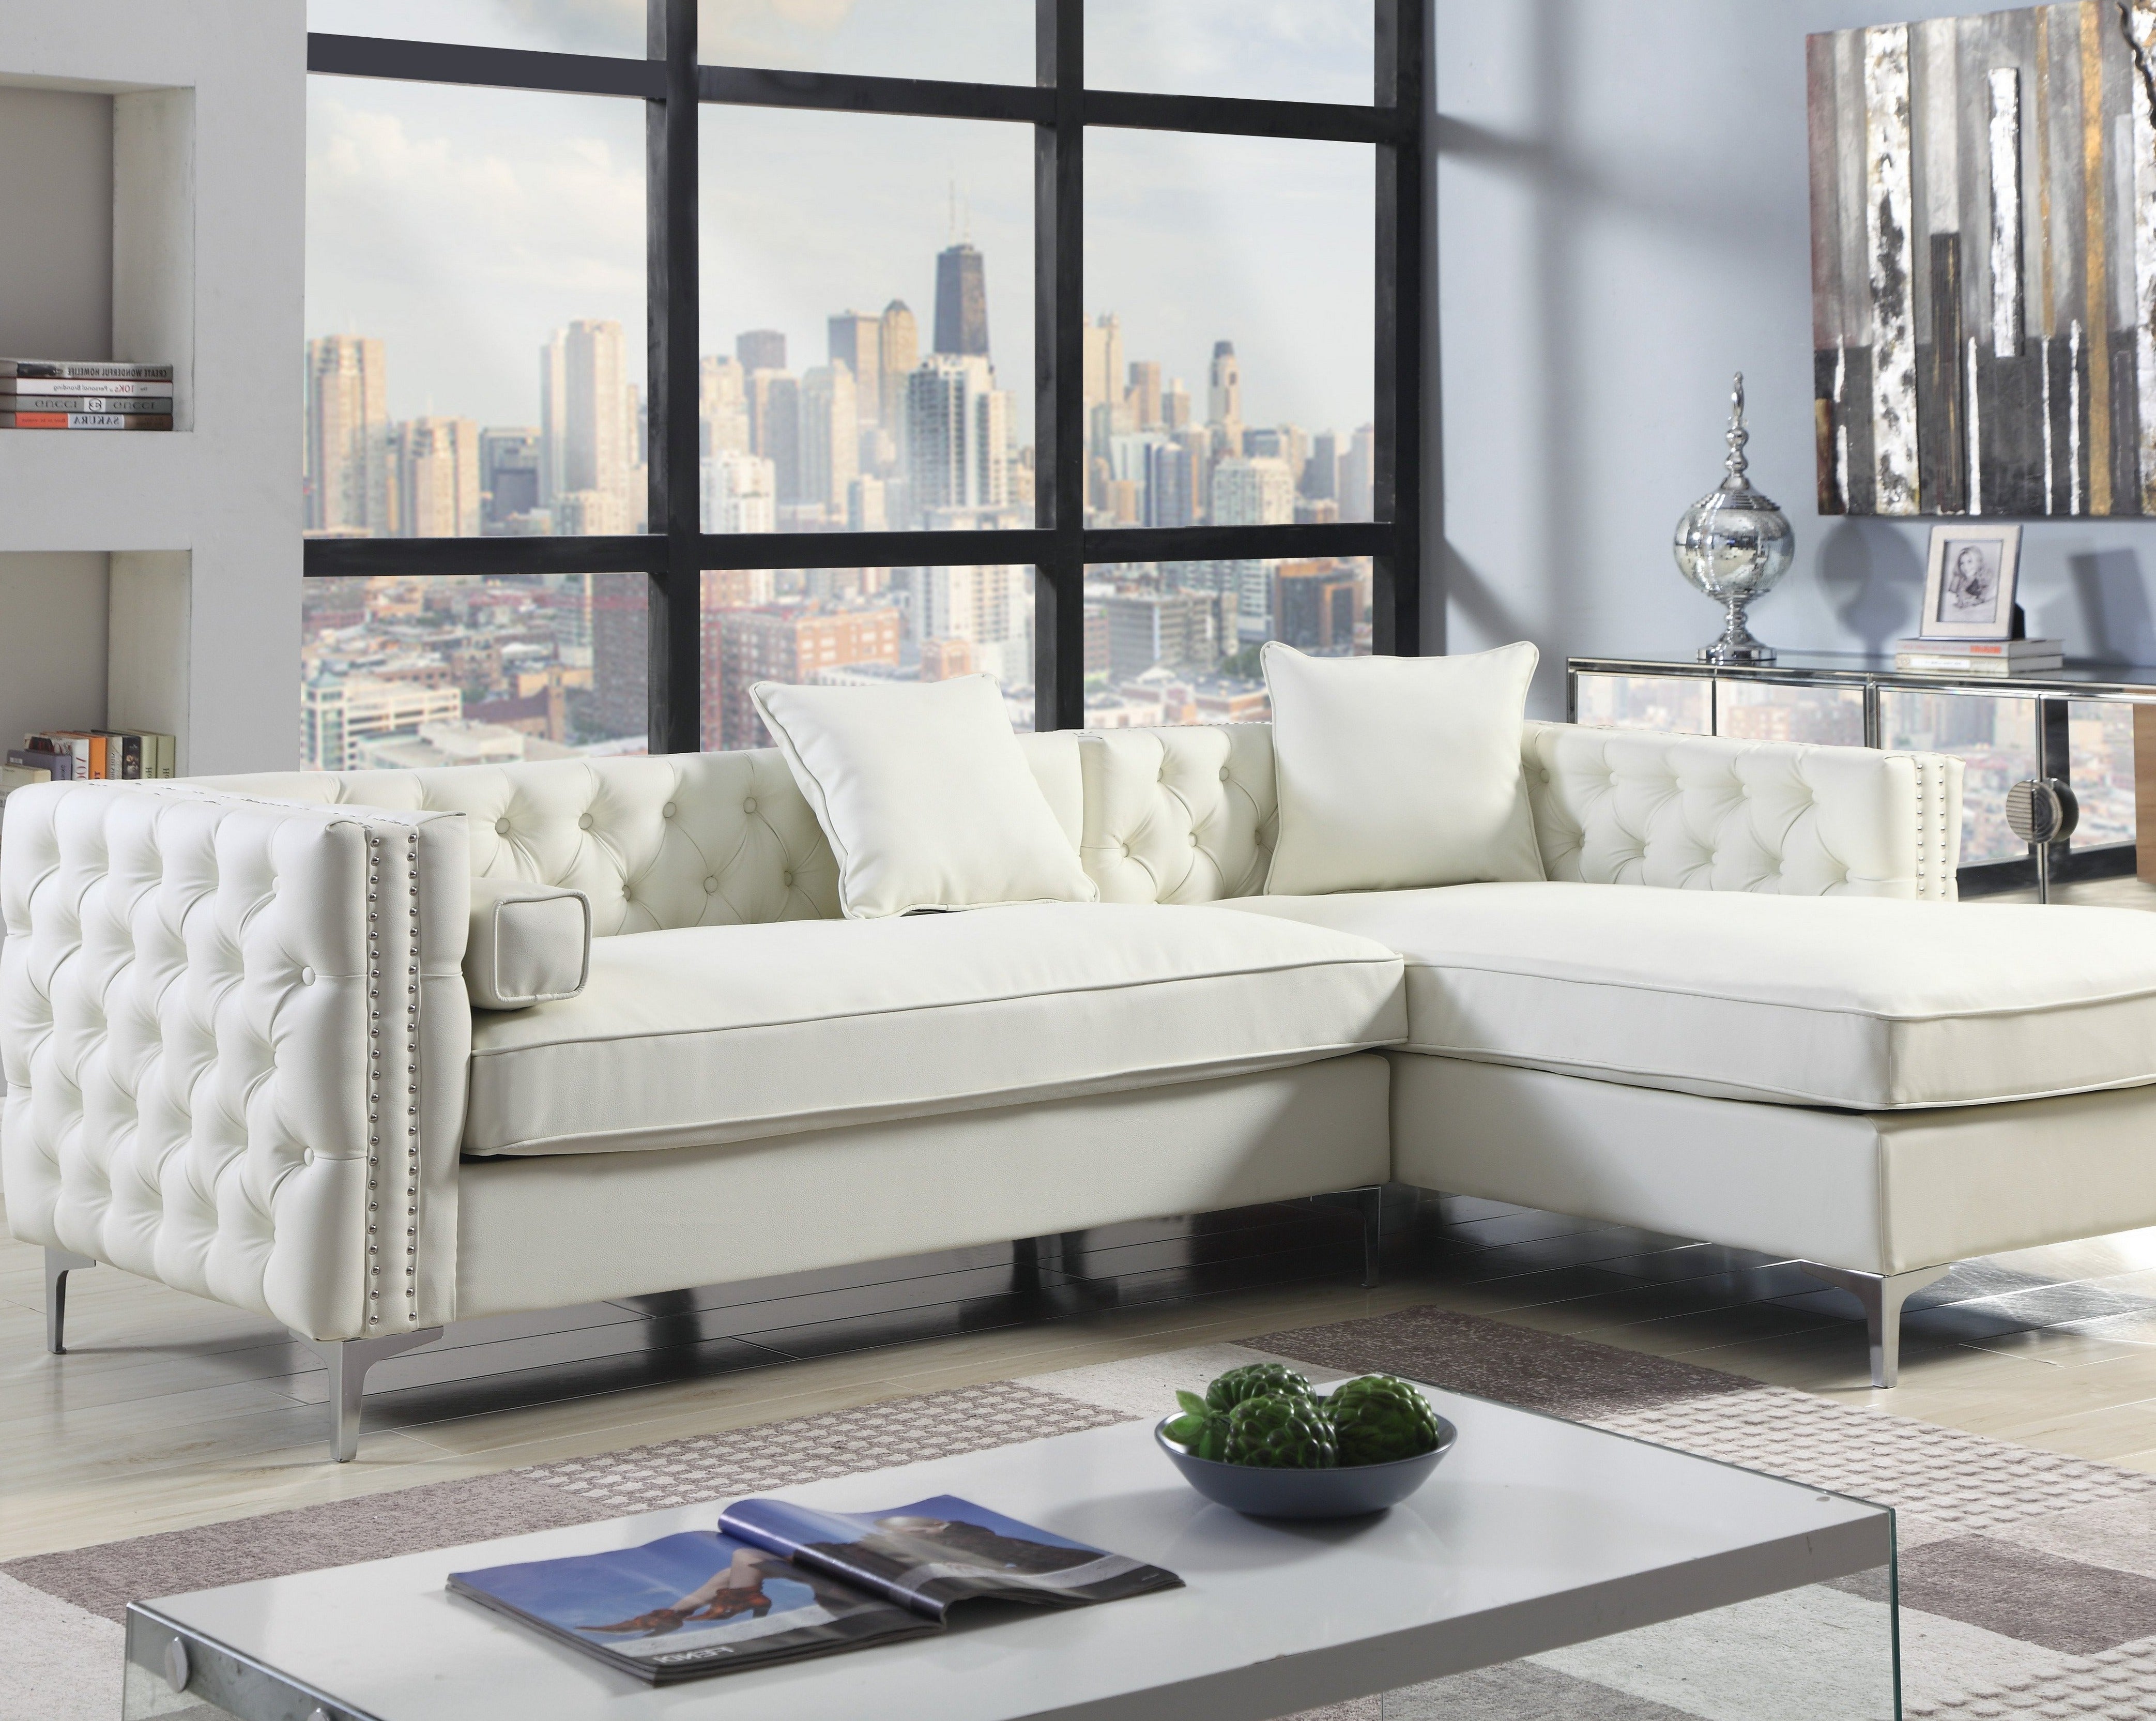 Monet Right Facing PU Leather Tufted Sectional Sofa